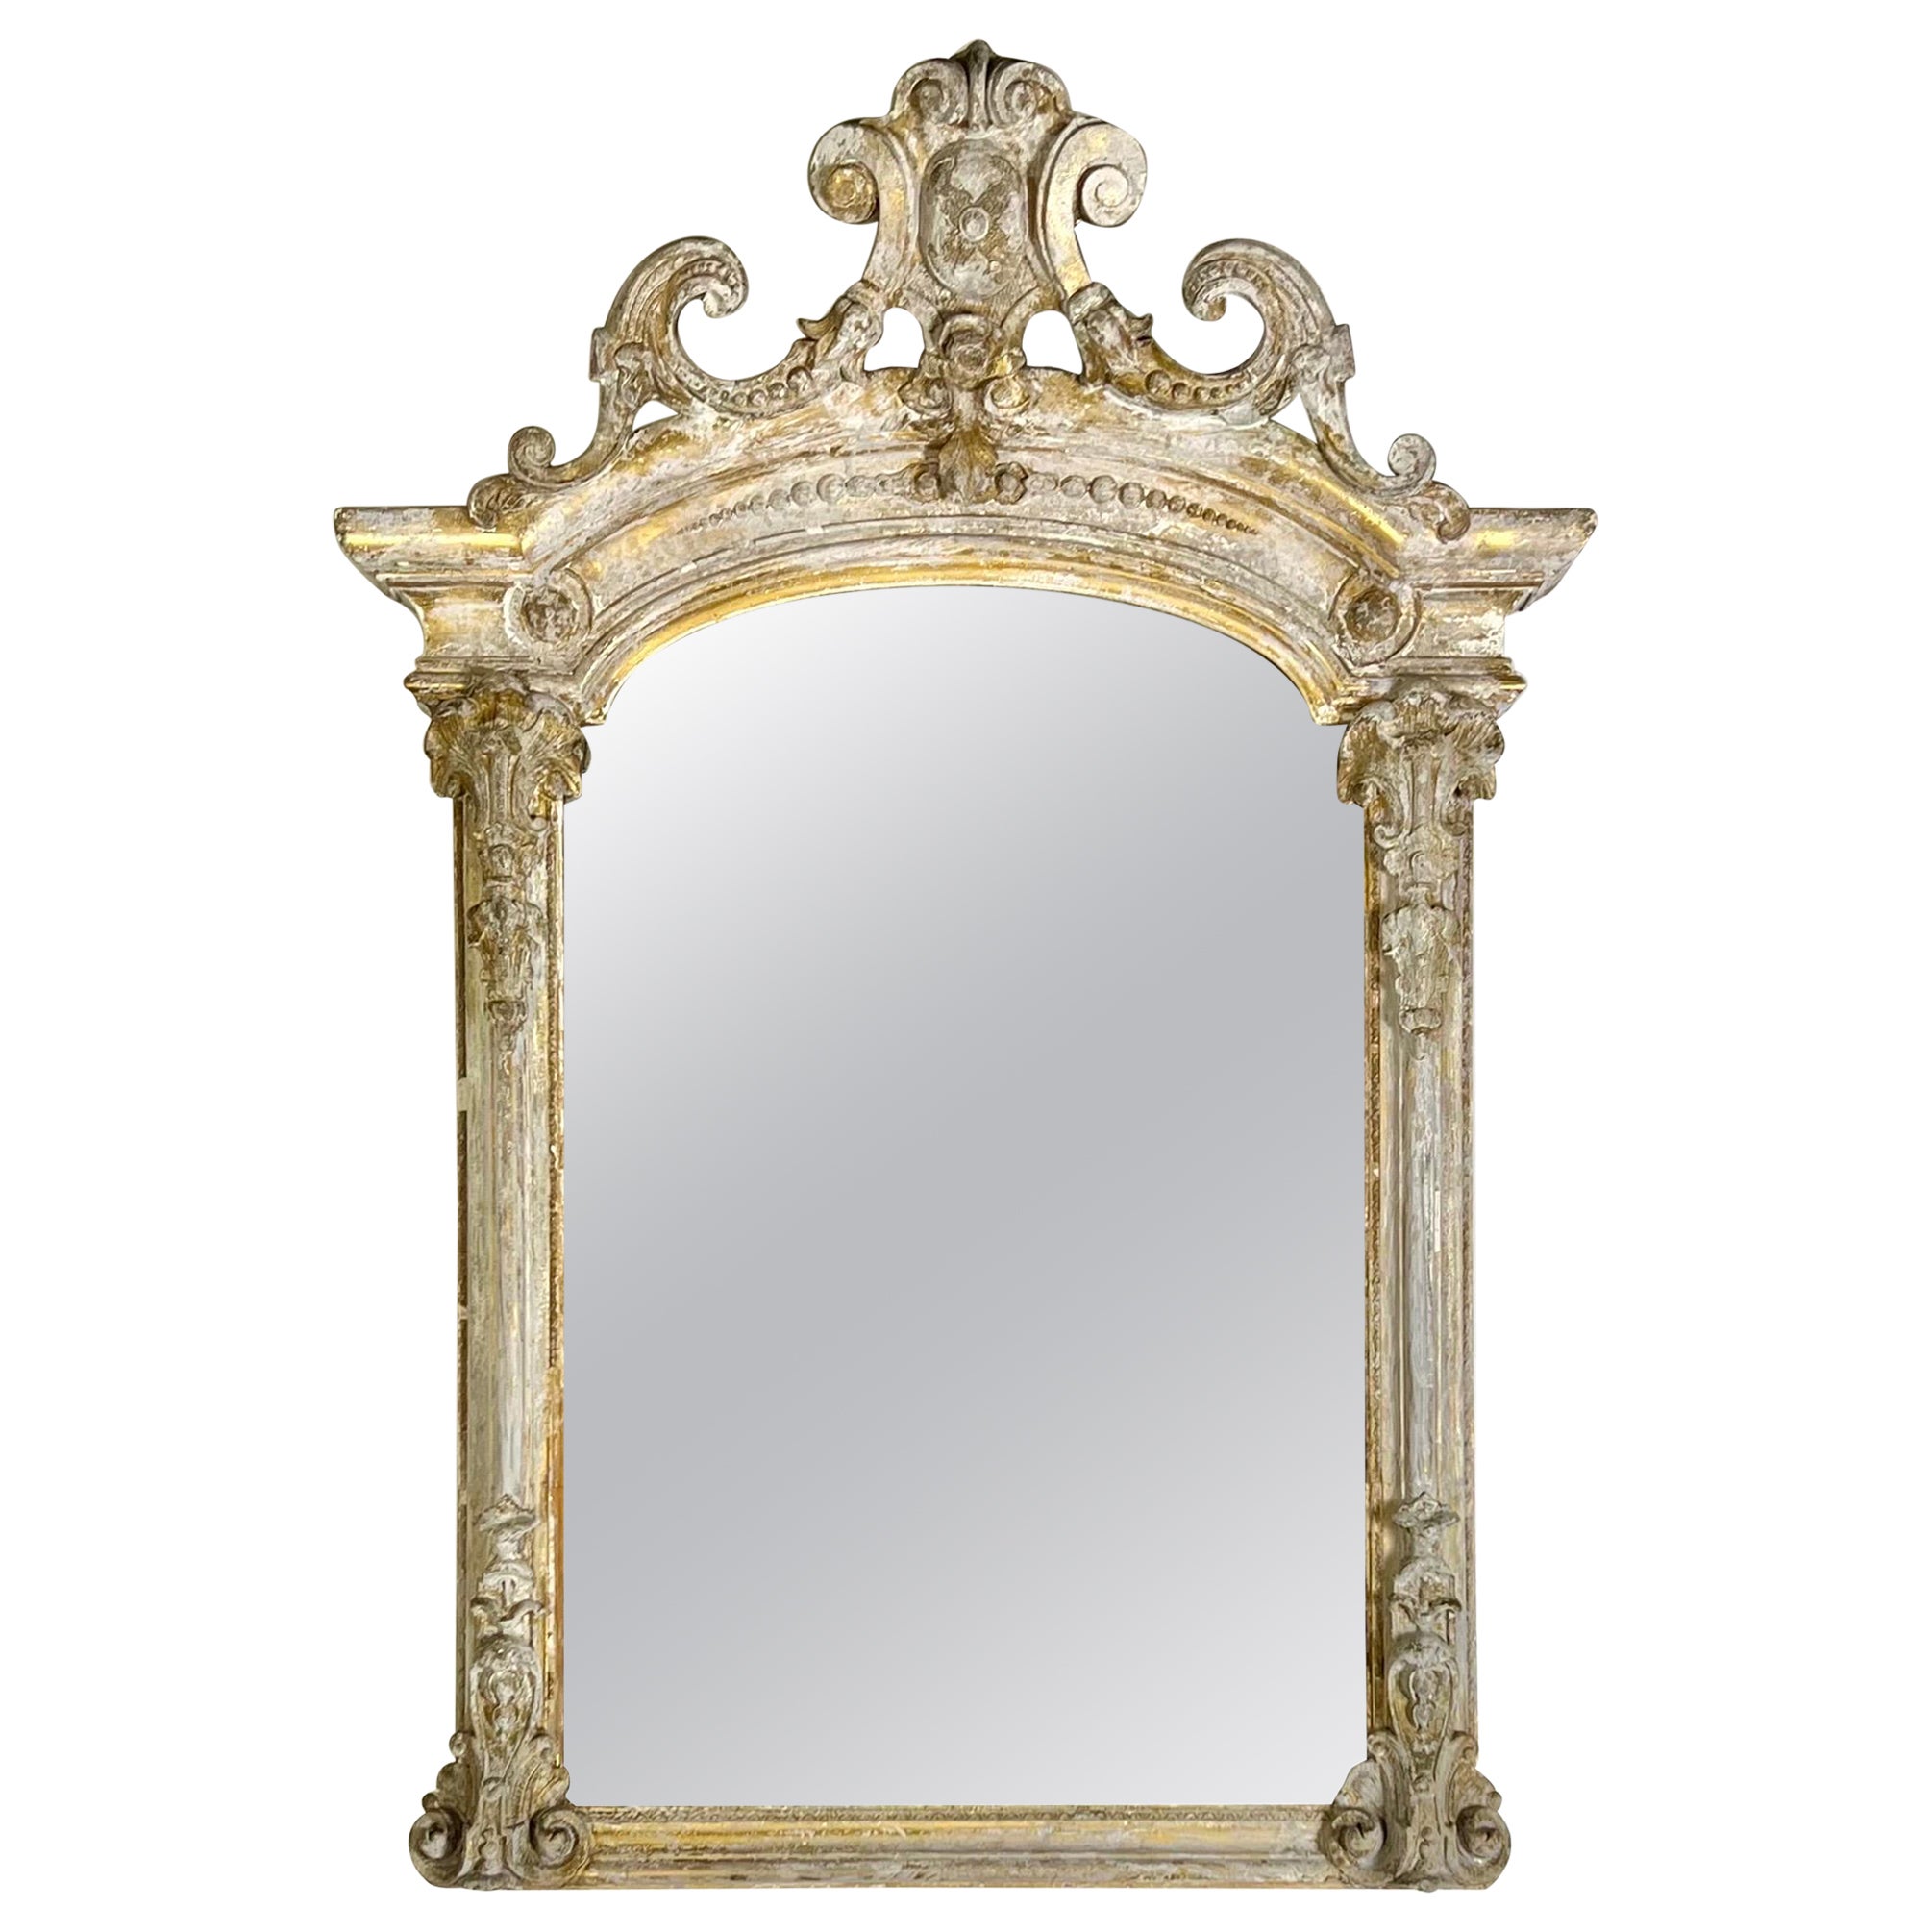 19th-Century French Rococo Style Painted Mirror For Sale